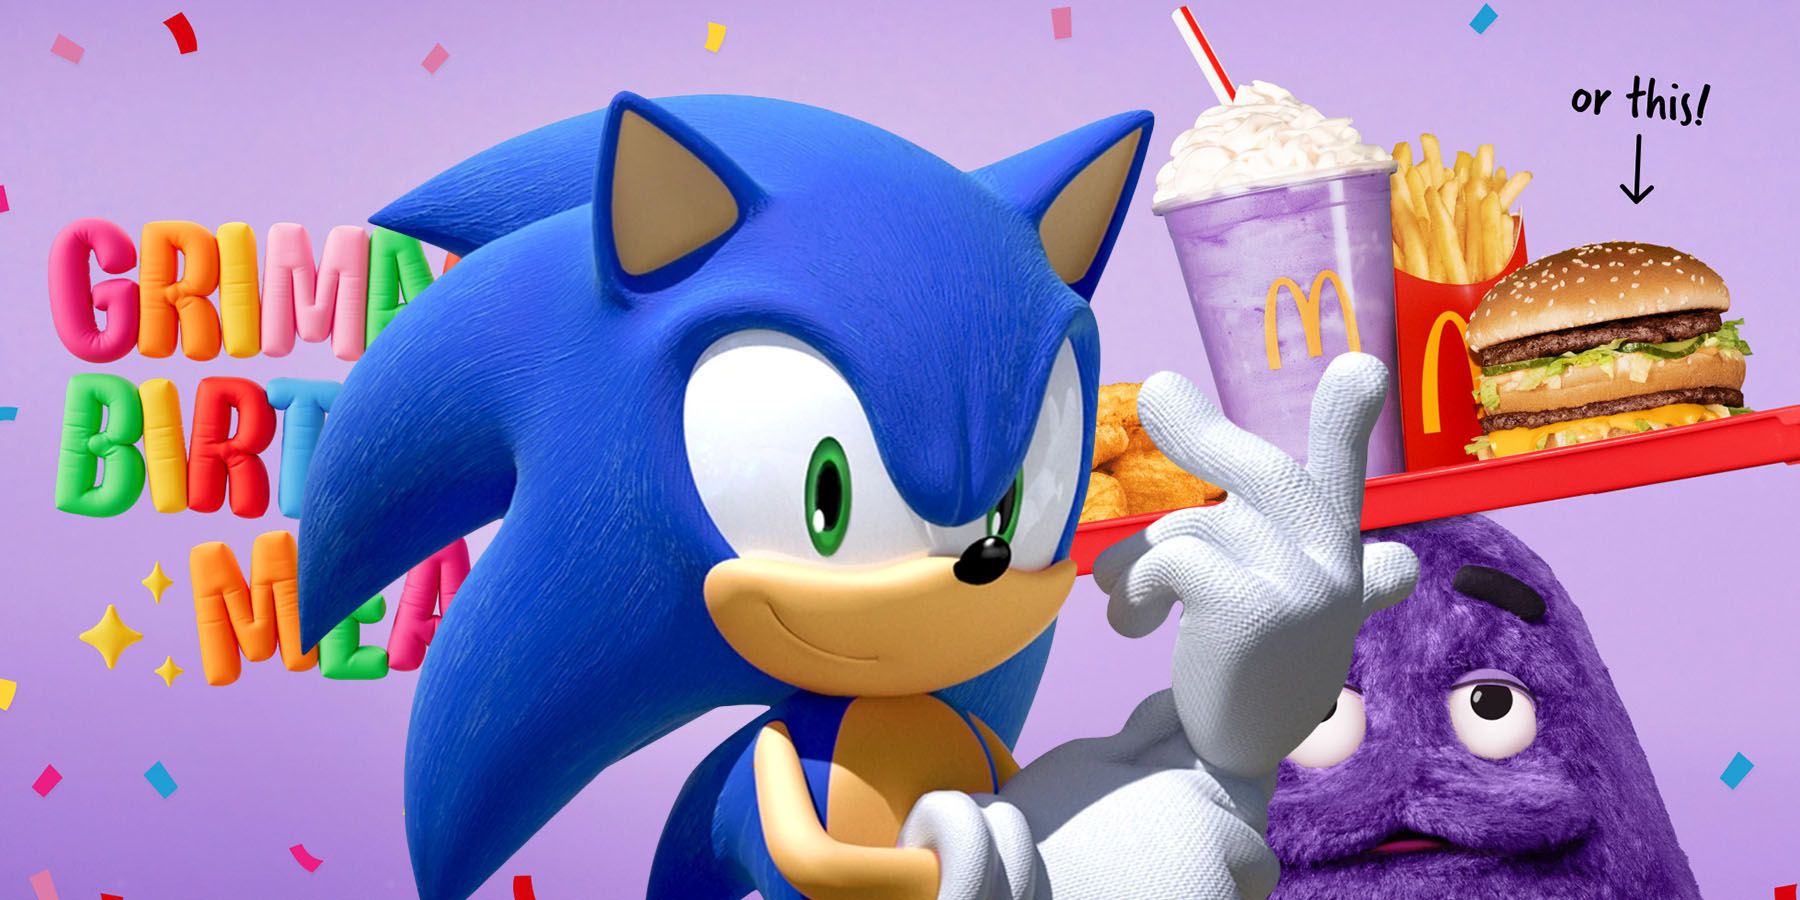 A screenshot of Sonic the Hedgehog standing in front of Grimace and his McDonald's birthday shake with a purple background.